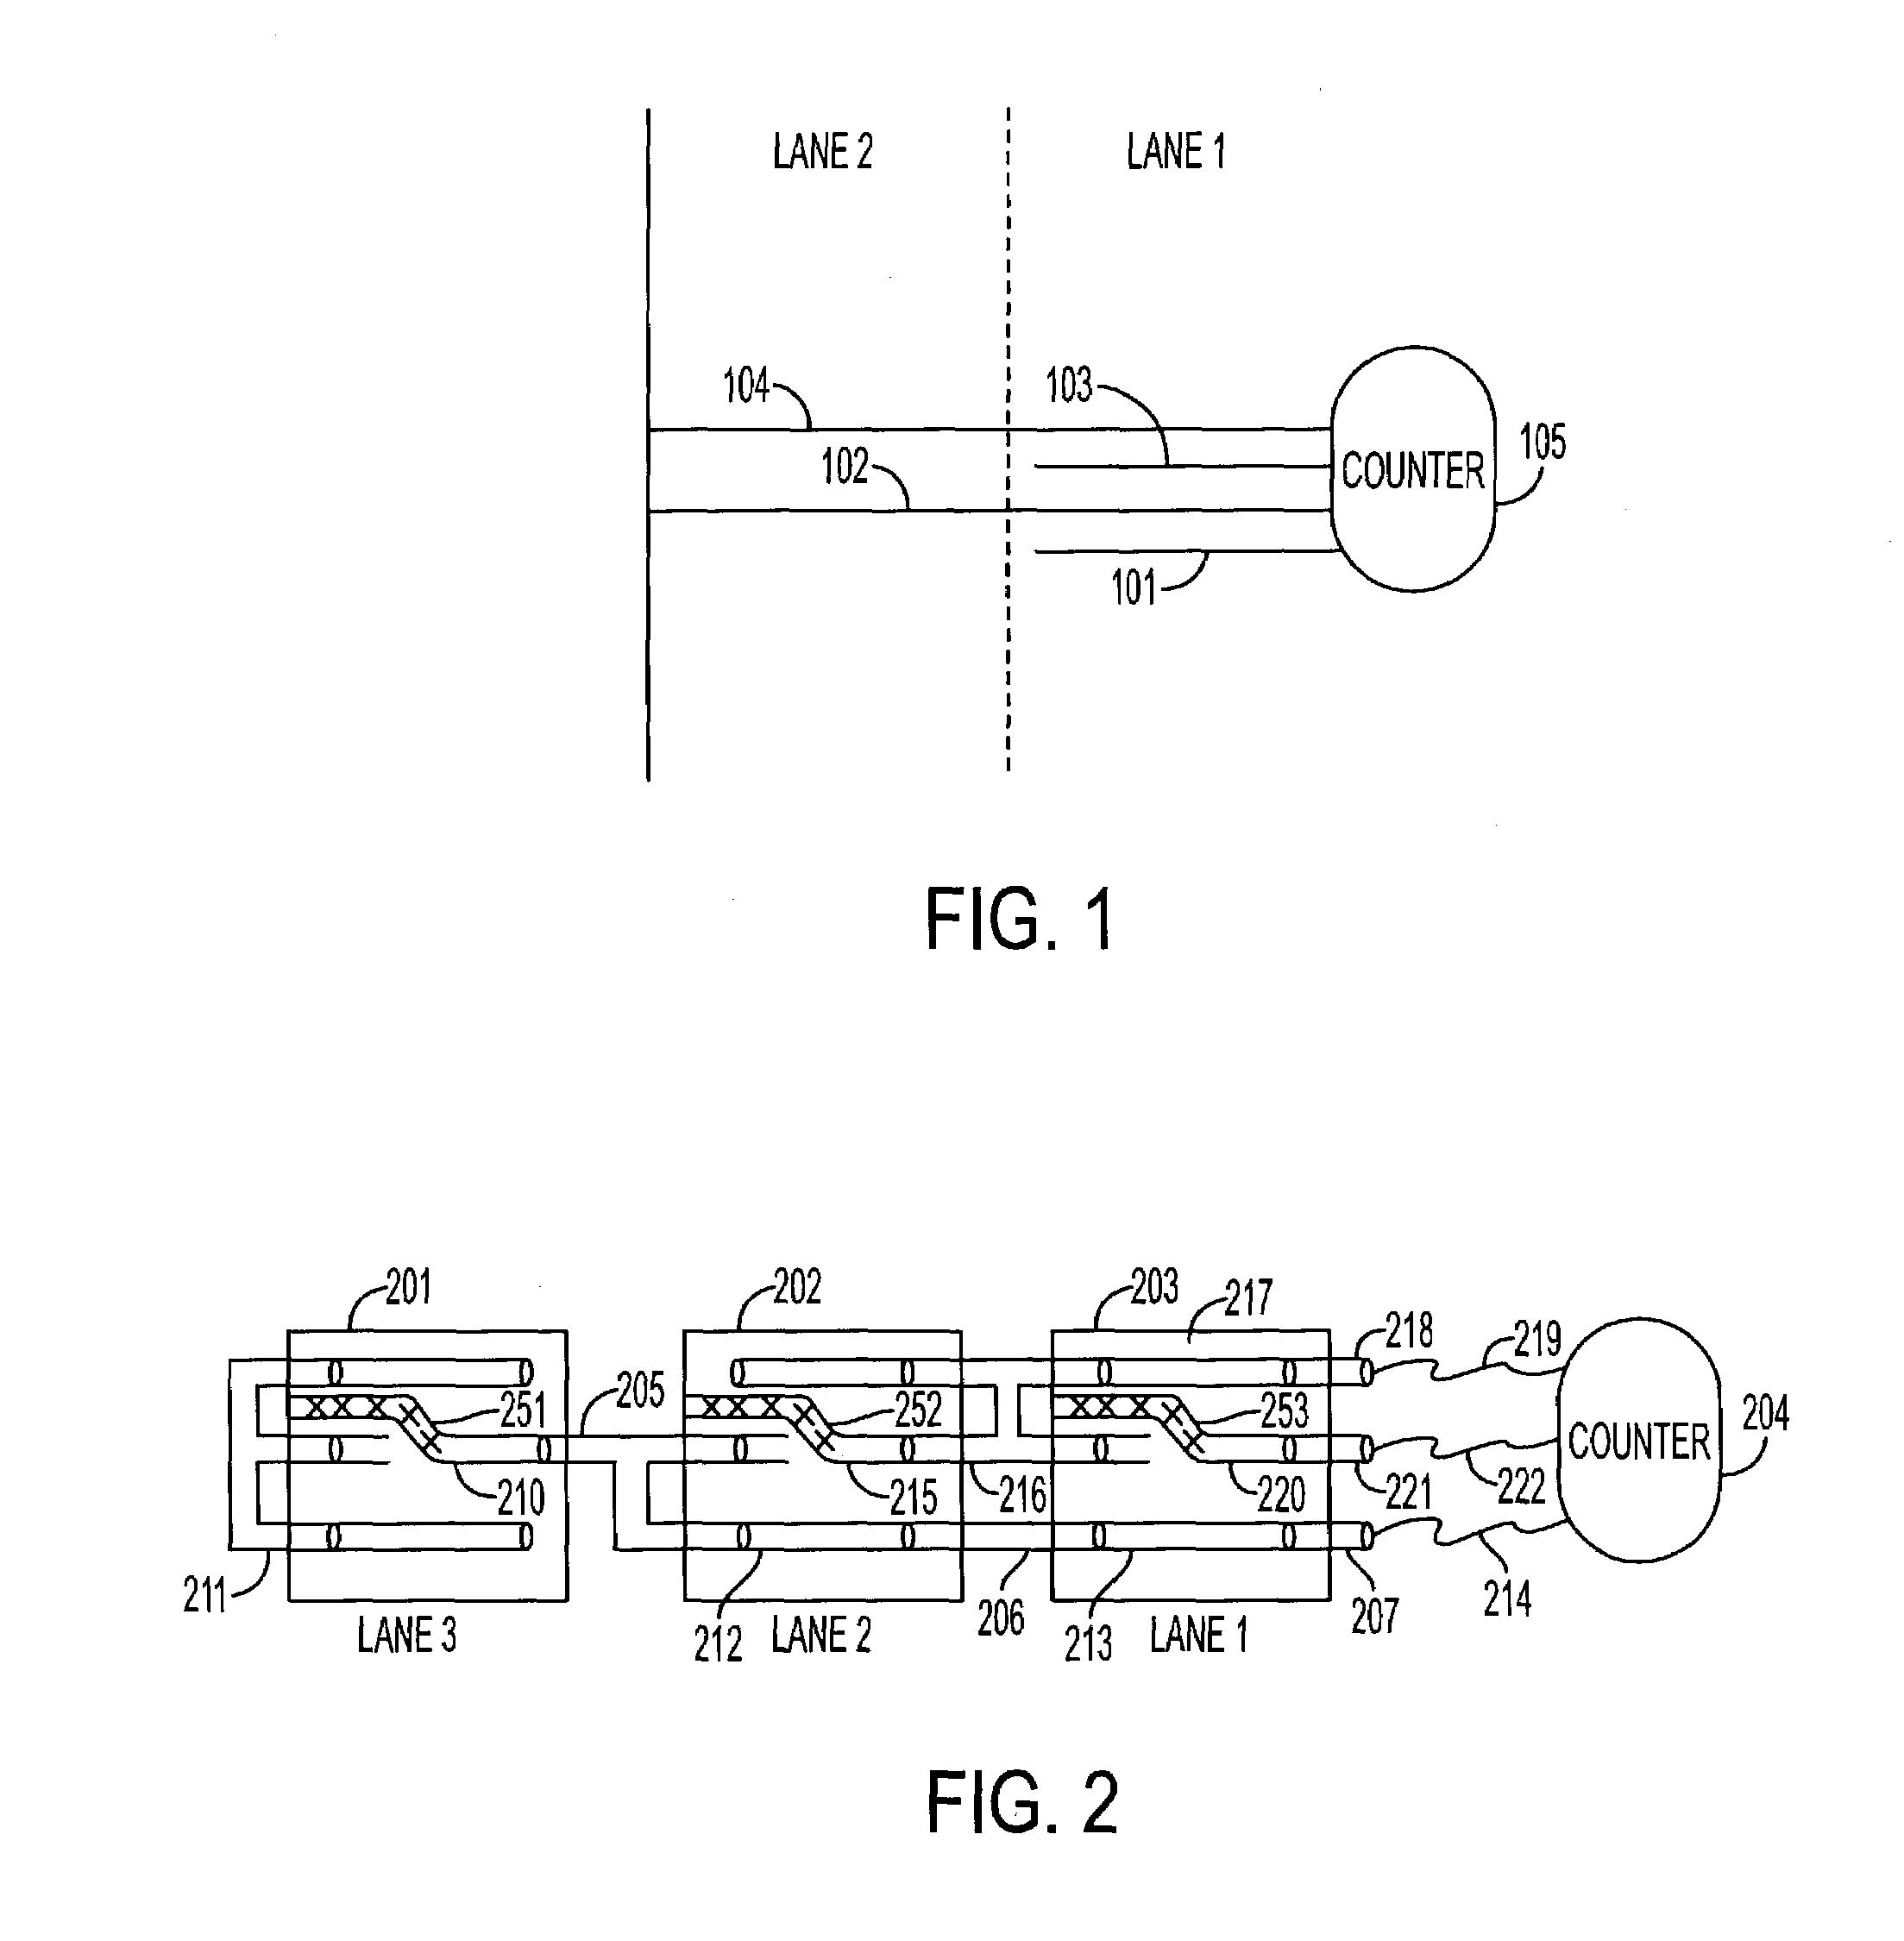 Acoustic pulse transfer system for event counting